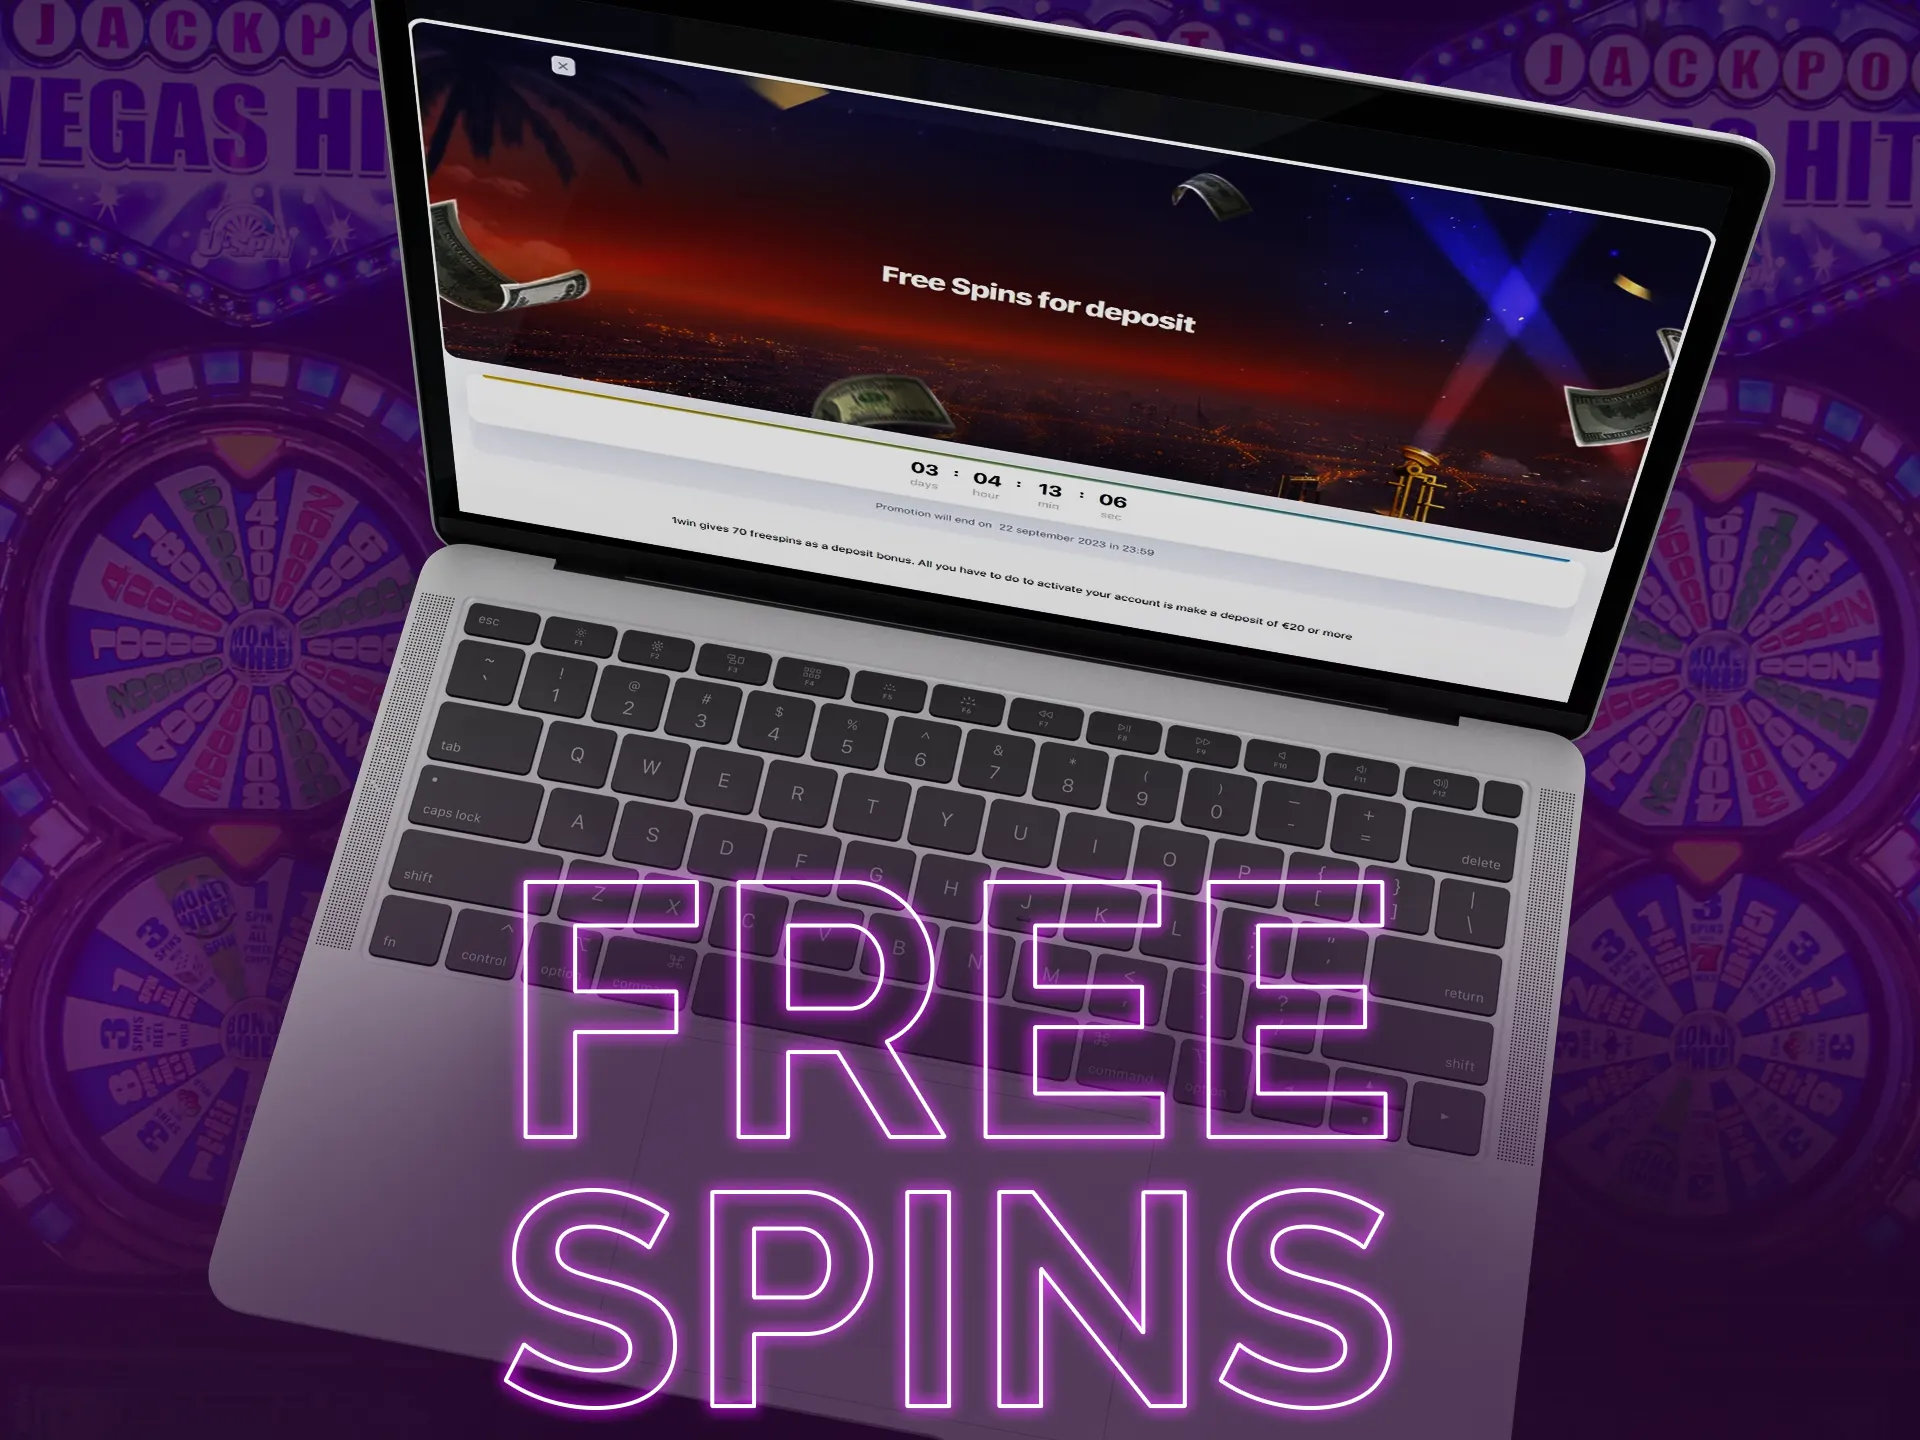 Free spins, a popular bonus, let players win real money on slot games without personal investment.